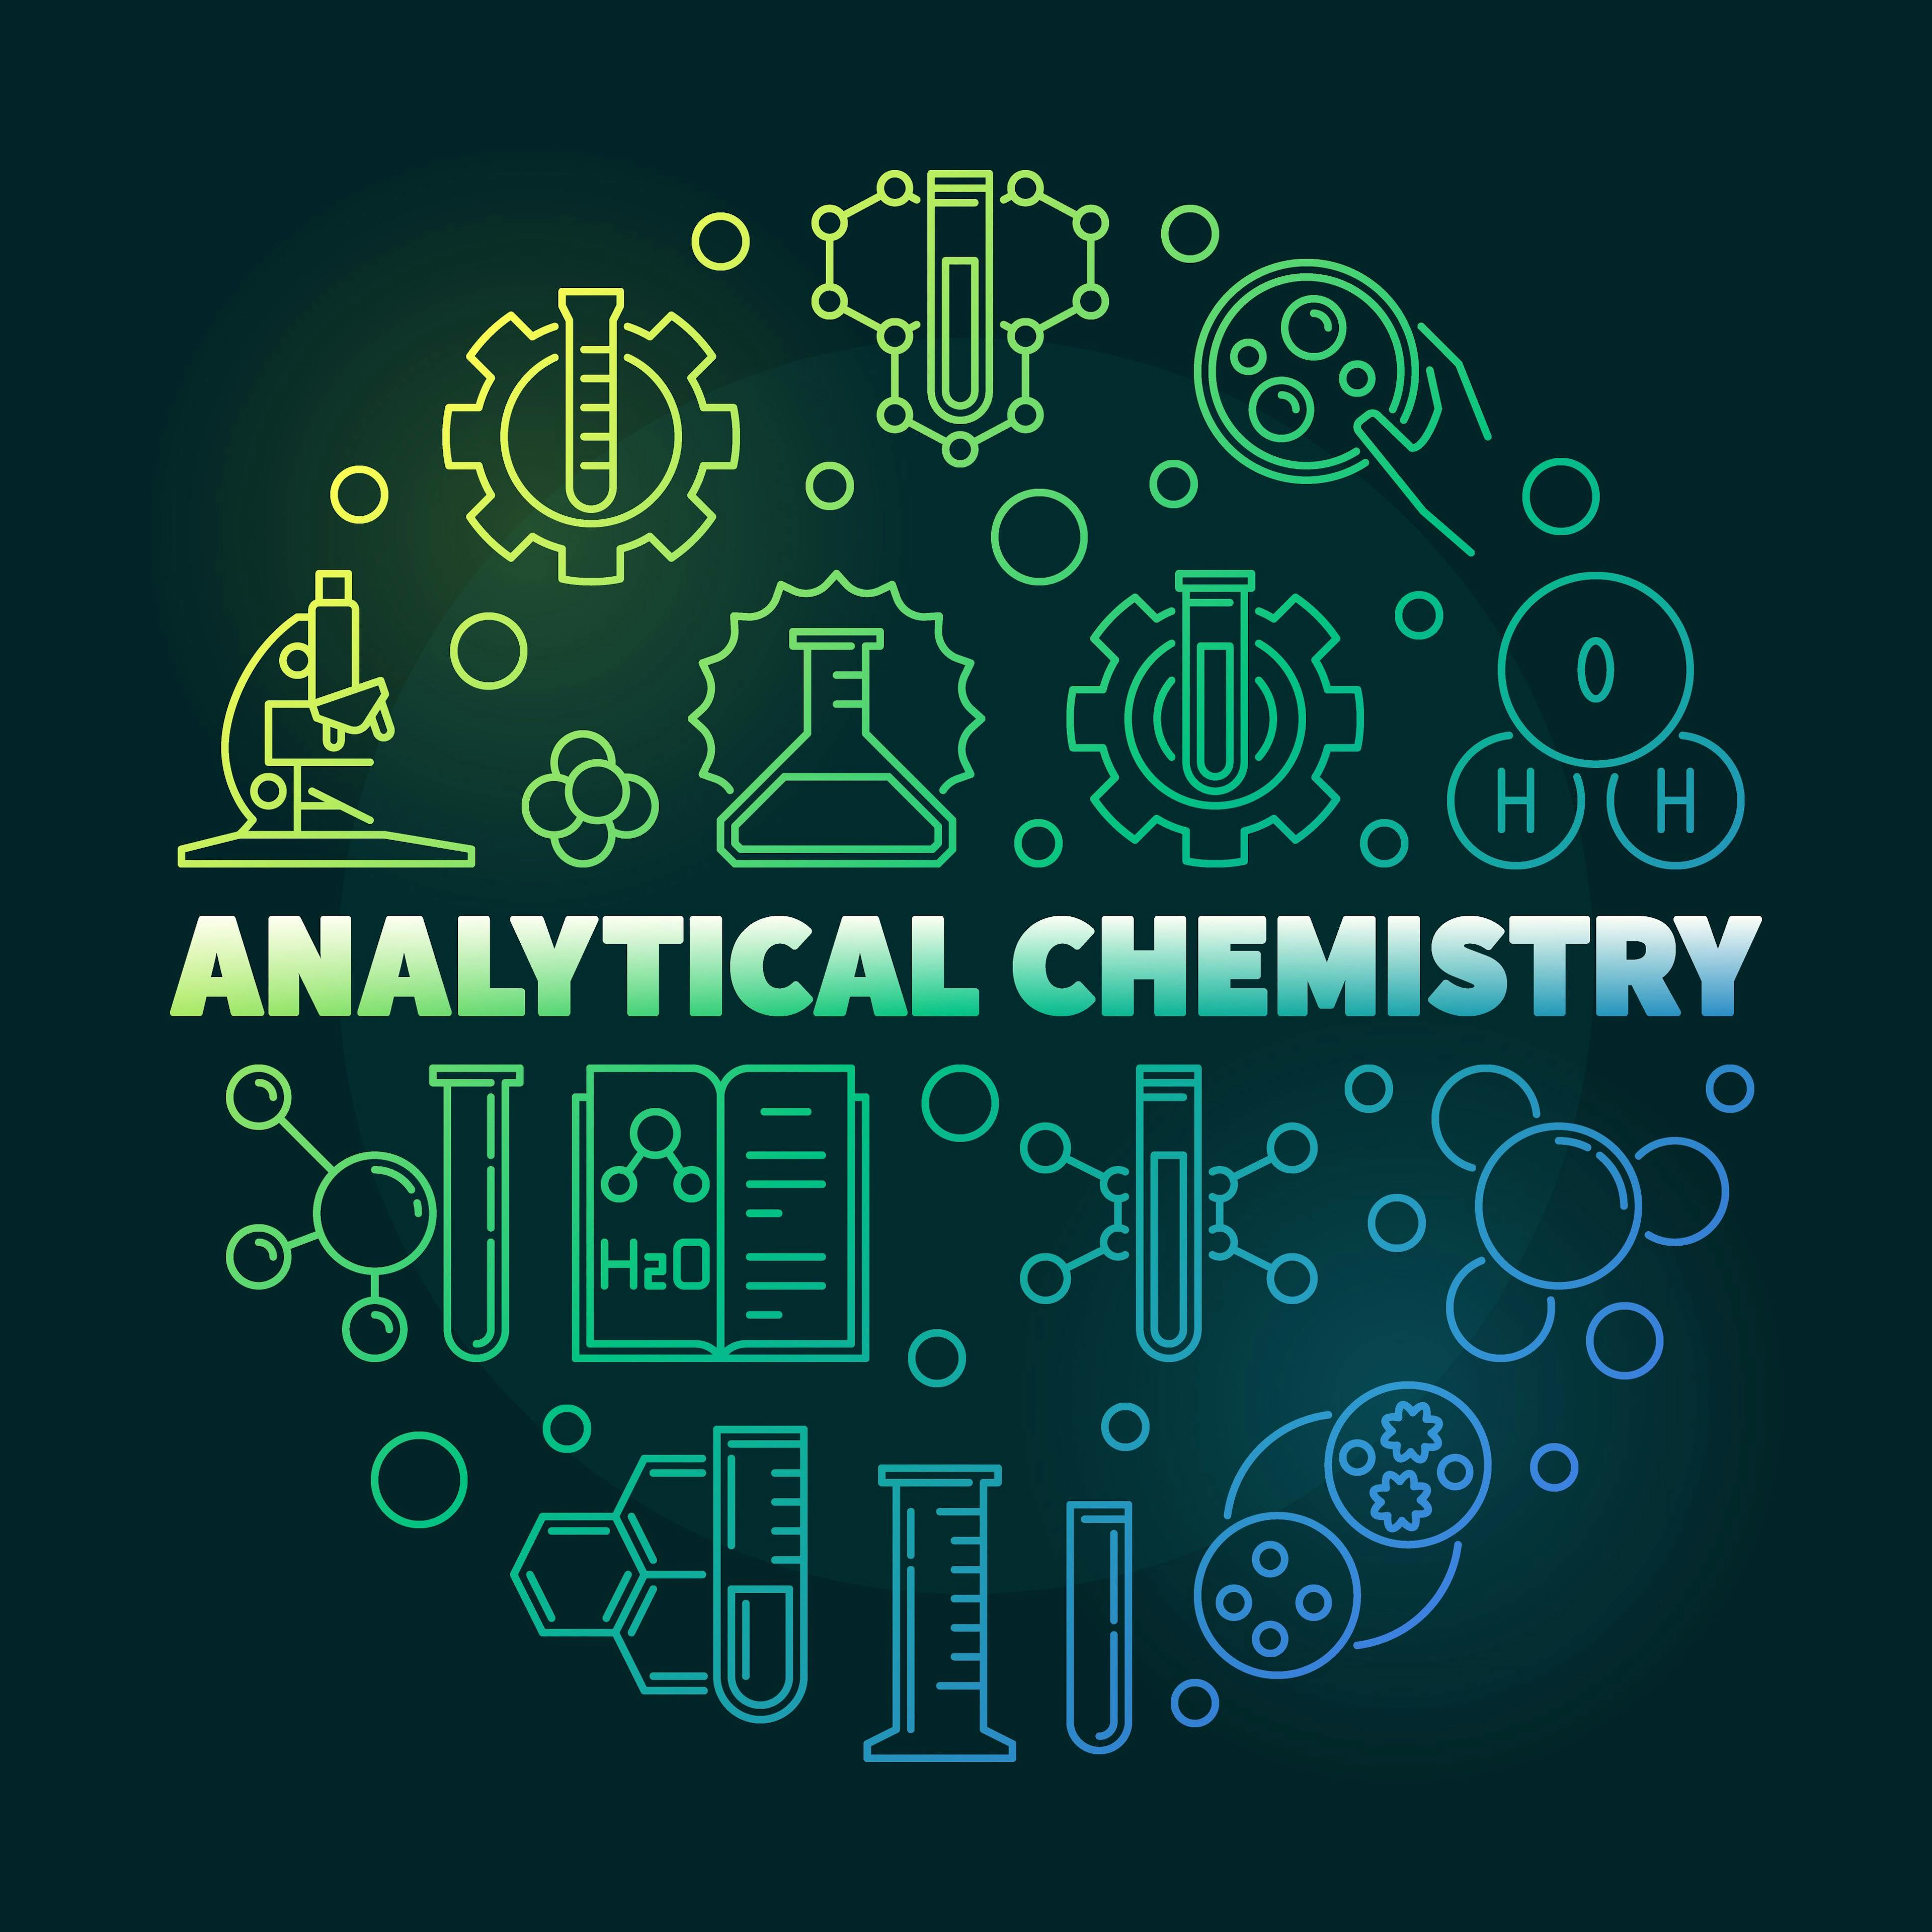 Analytical Chemistry vector colorful round outline illustration on dark background | Image Credit: © tentacula - stock.adobe.com